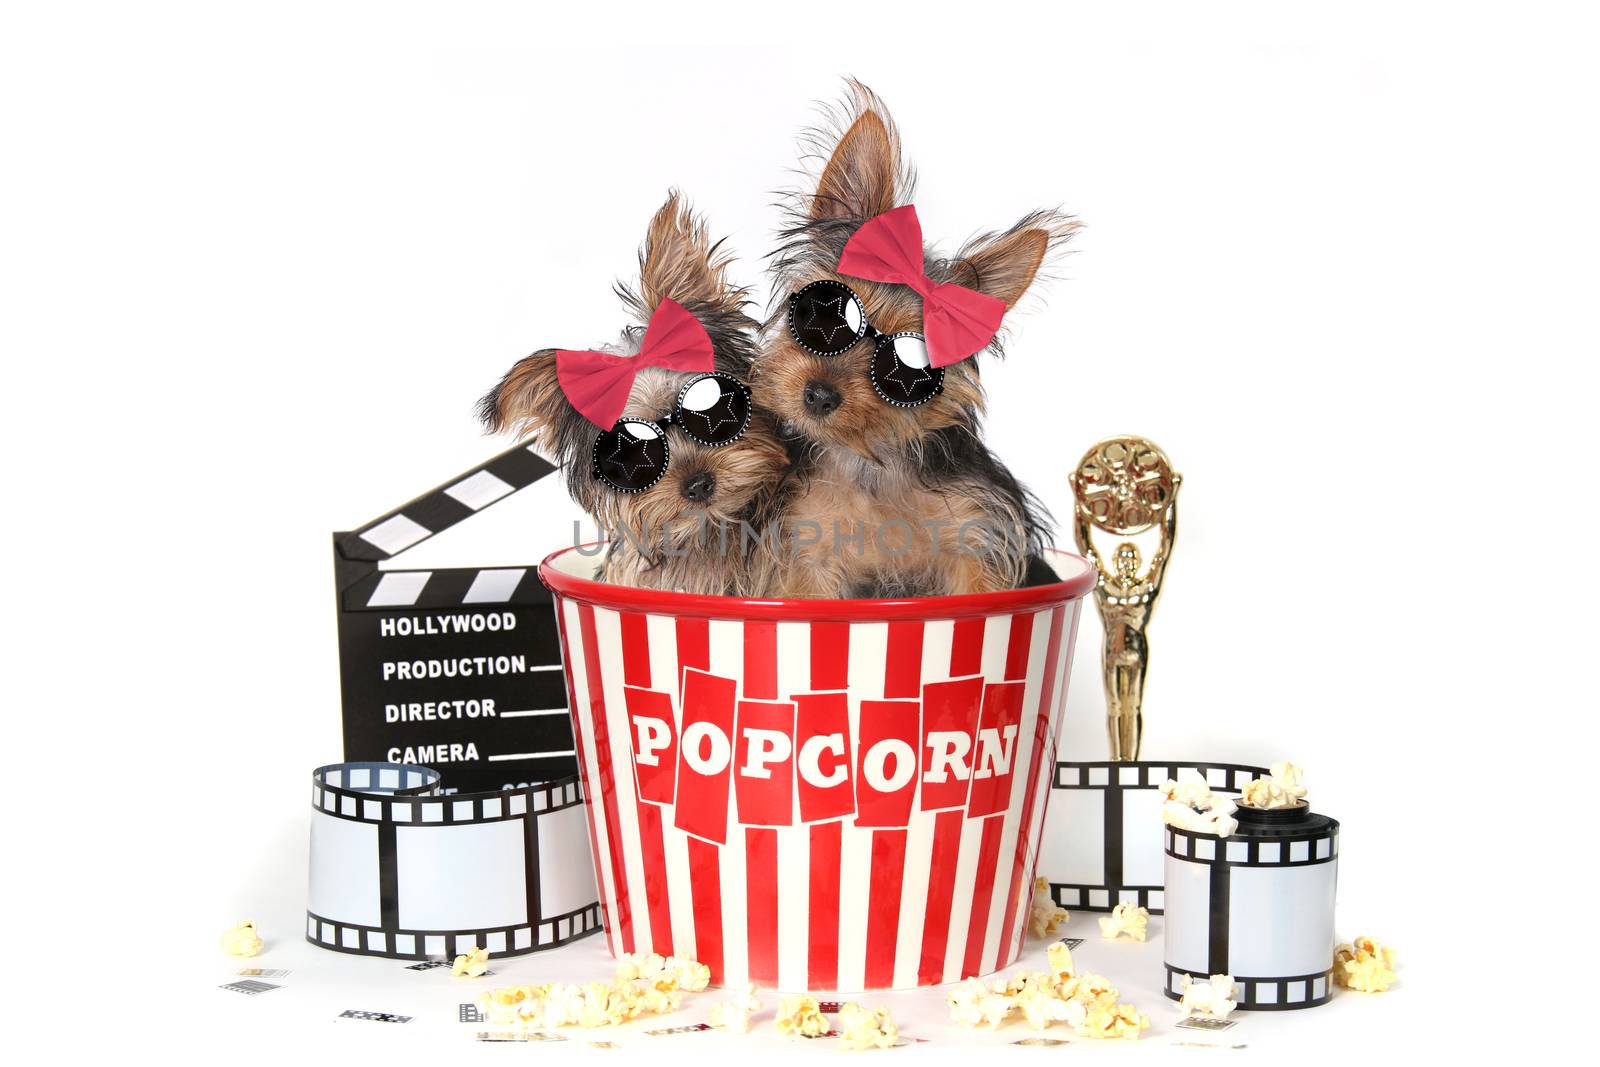 Glamorous Yorkshire Terrier Puppies Celebrating Hollywood Movies